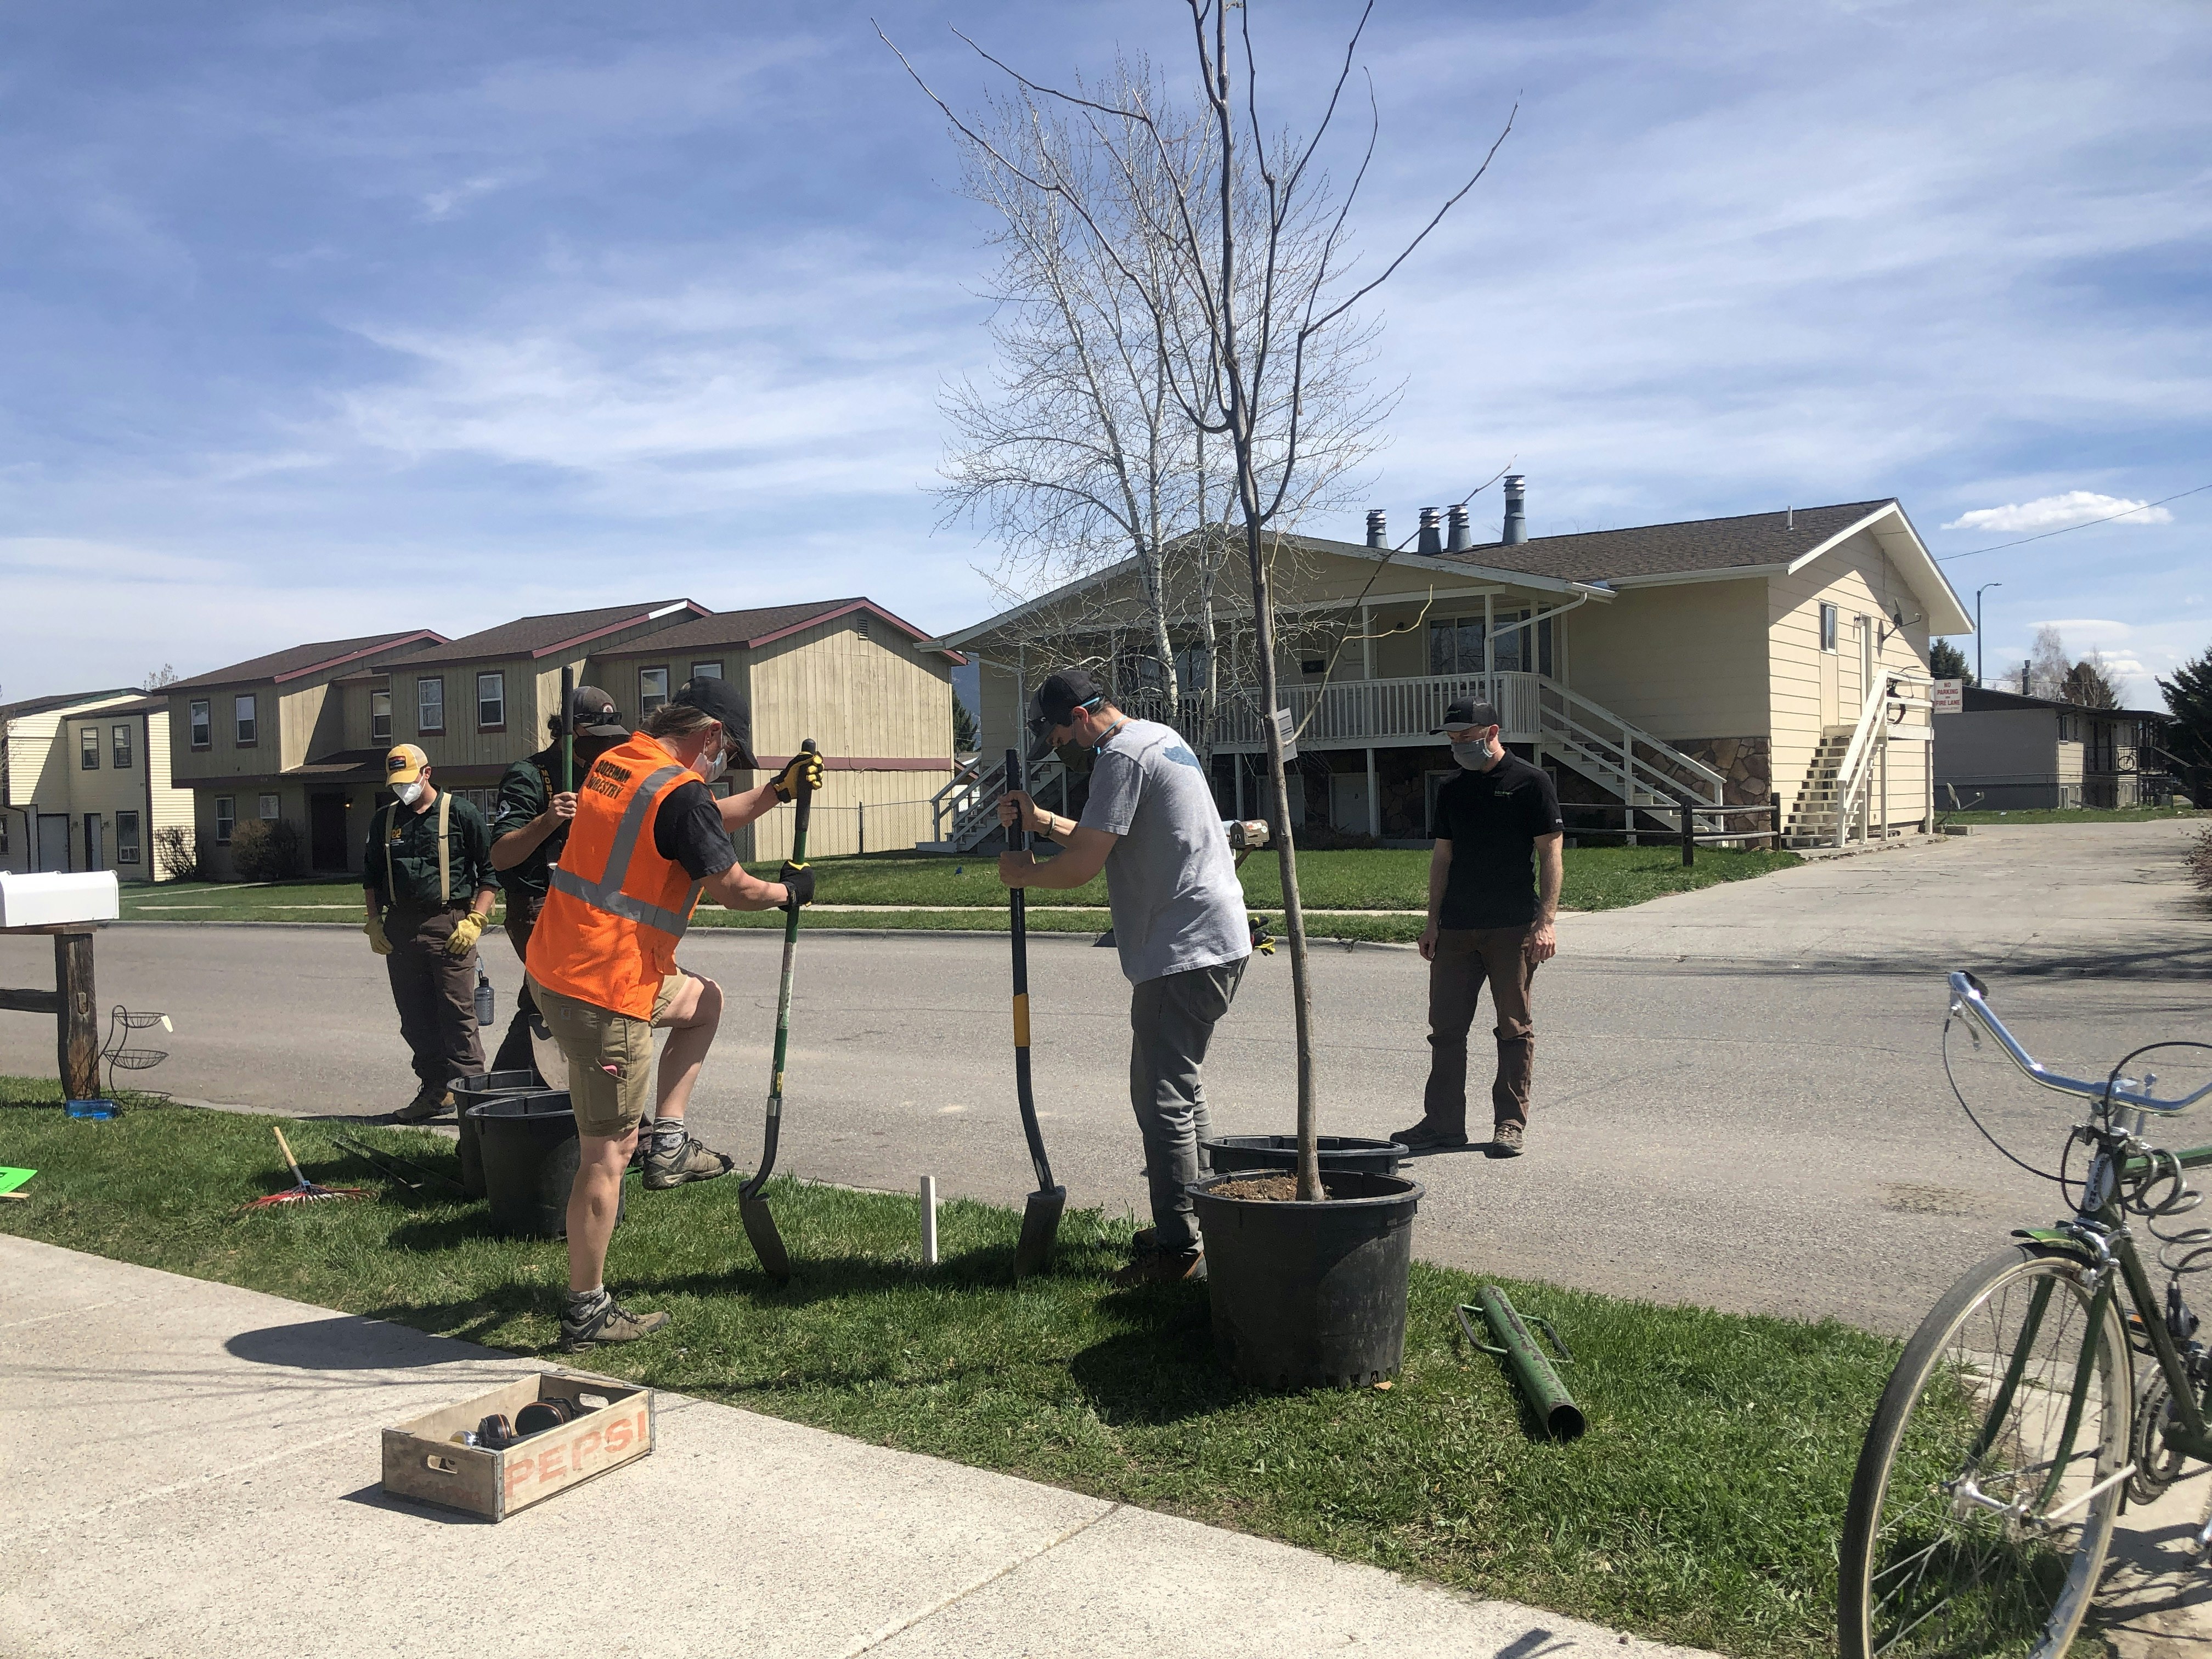 Planting trees in a neighborhood in Bozeman, Montana on Arbor Day 2021.